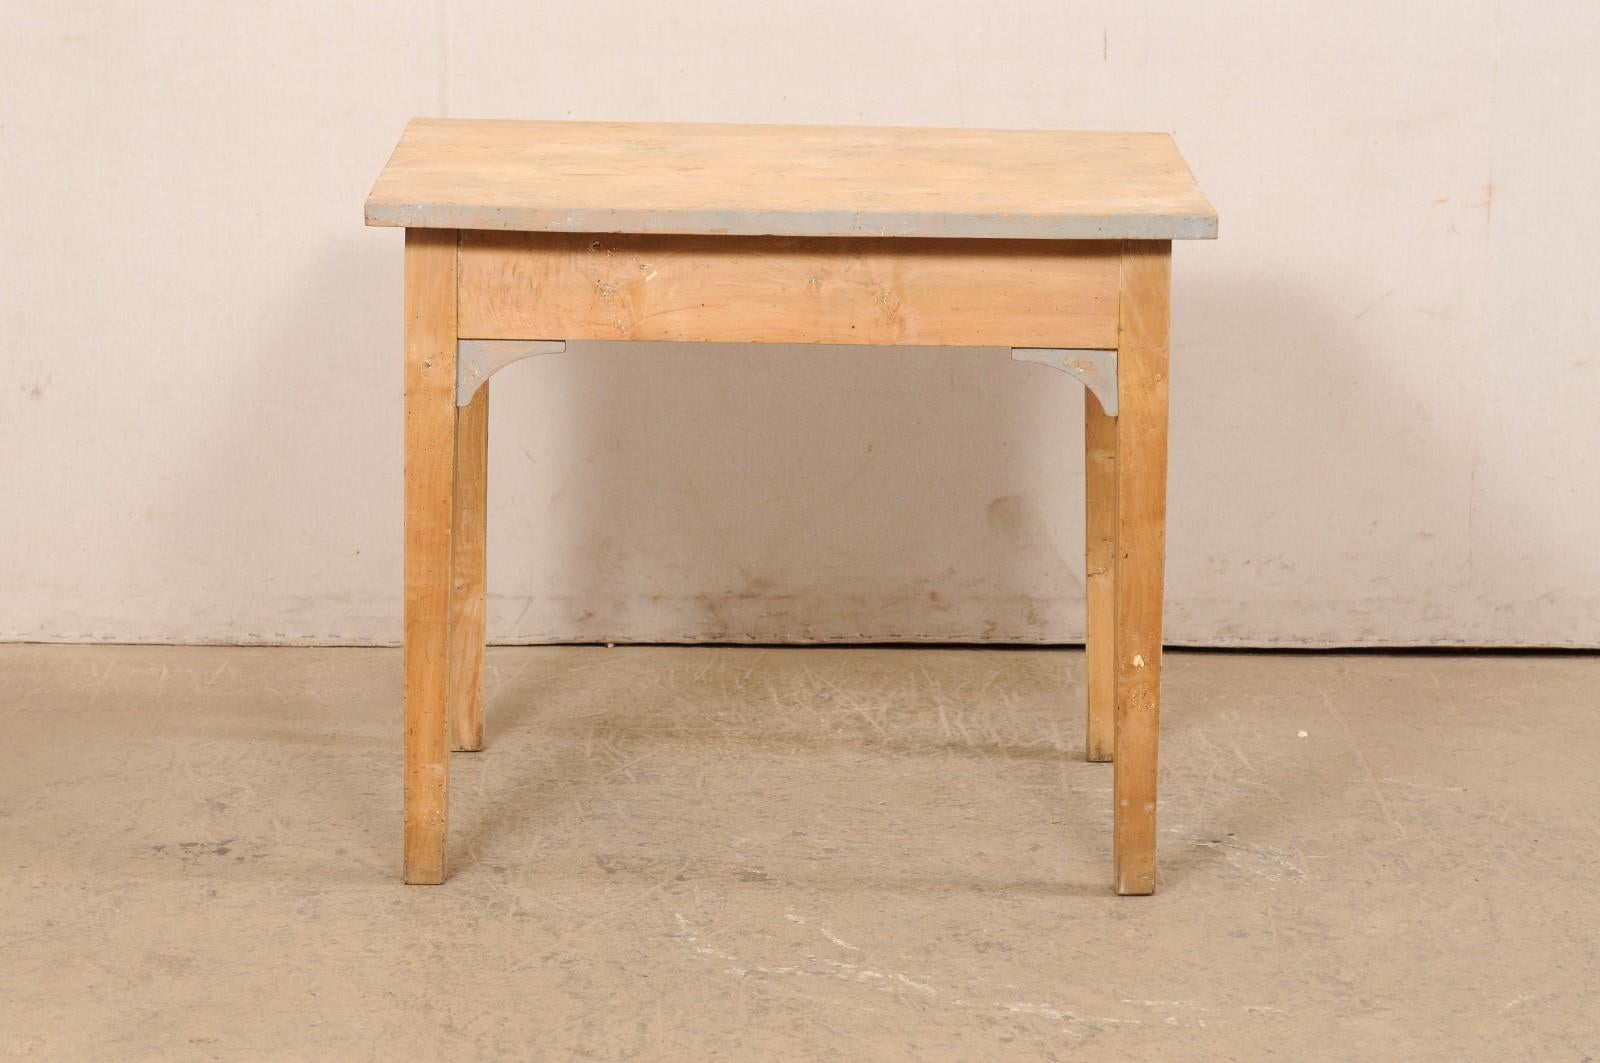 Swedish Curly Birch Wood Table, Early 20th C. For Sale 7